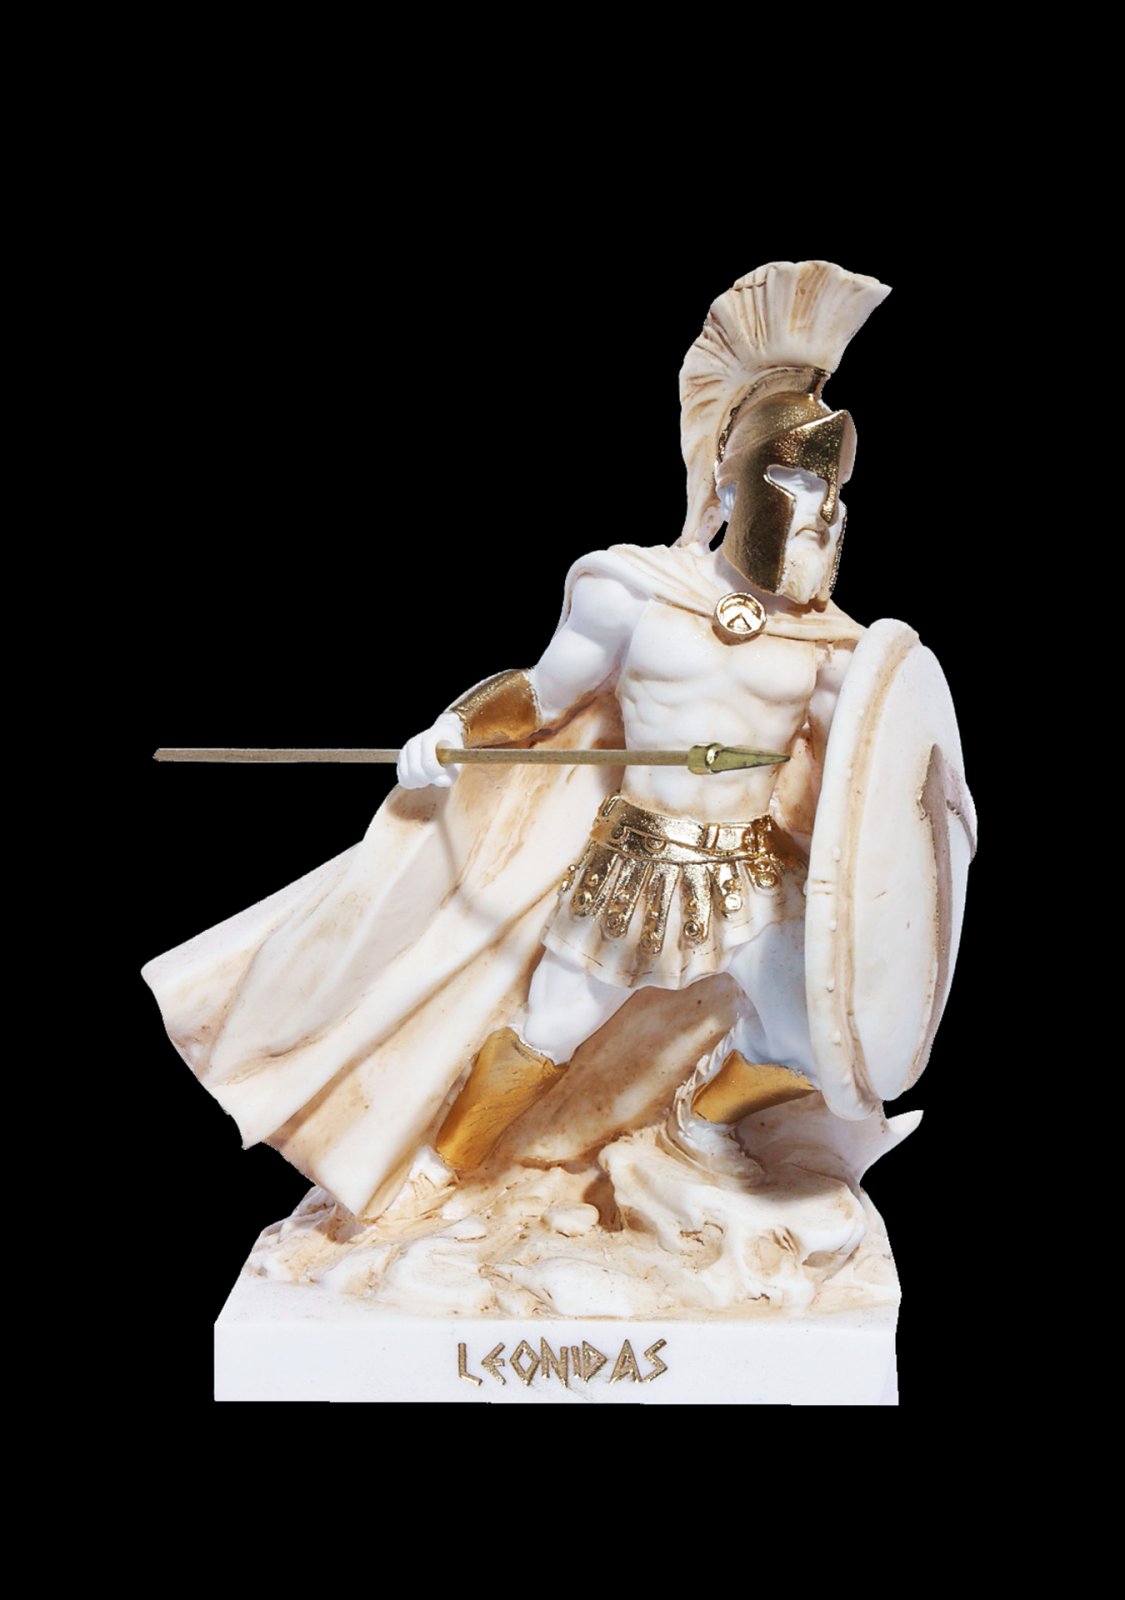 Leonidas Greek King of Ancient city-state Sparta Handmade and Hand Painted Alabaster FigurineCast Marble Sculpture 18cm-7.08inches